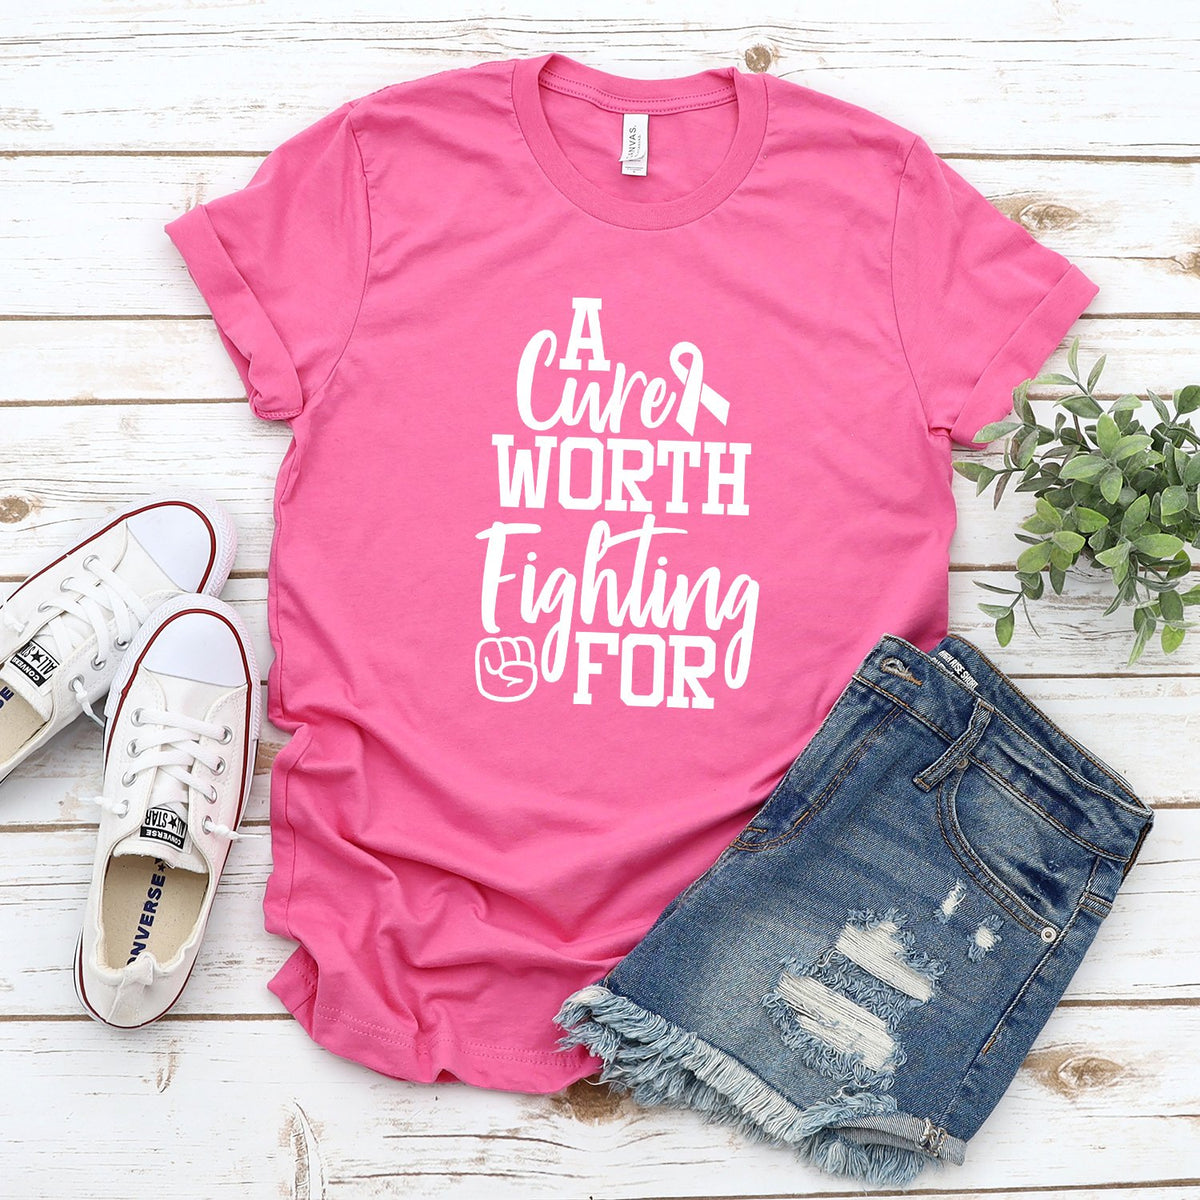 A Cure Worth Fighting For - Short Sleeve Tee Shirt